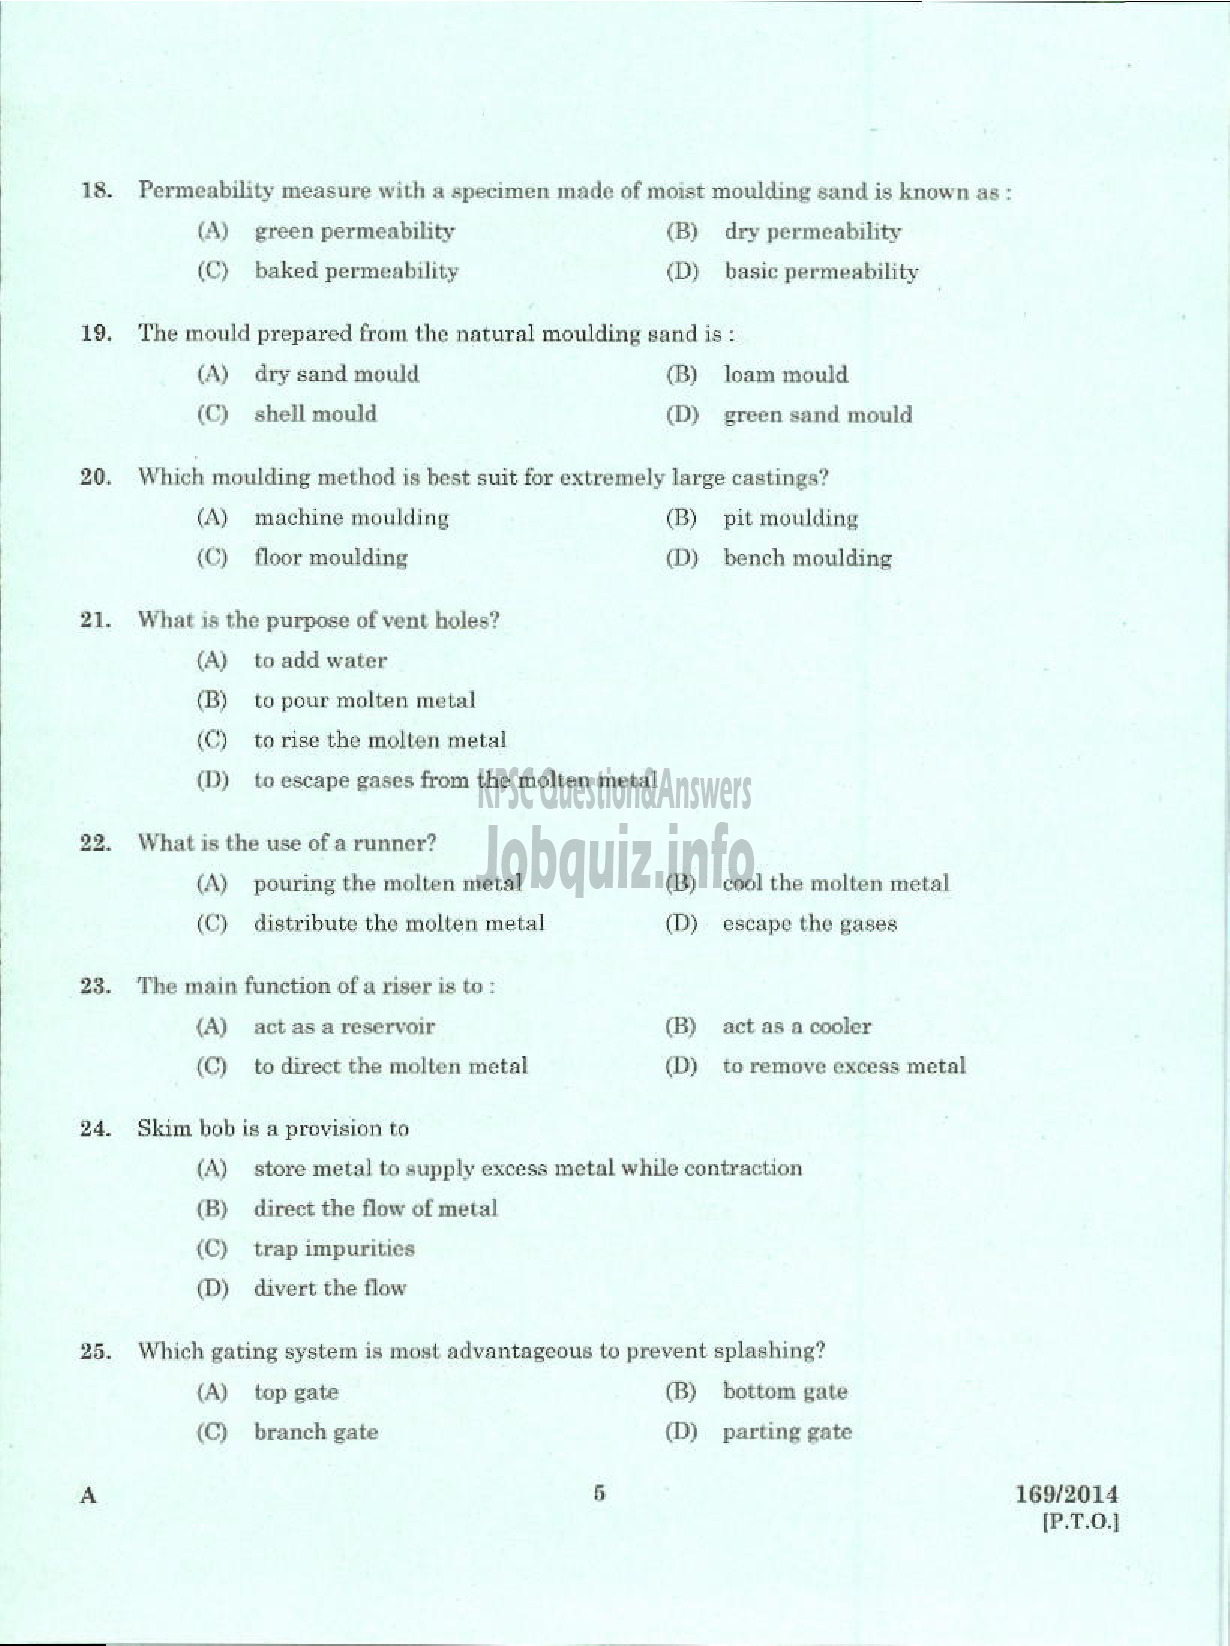 Kerala PSC Question Paper - TRADESMAN MOULDING AND FOUNDRY TECHNICAL EDUCATION TVPM PTA KTM AND TSR-3